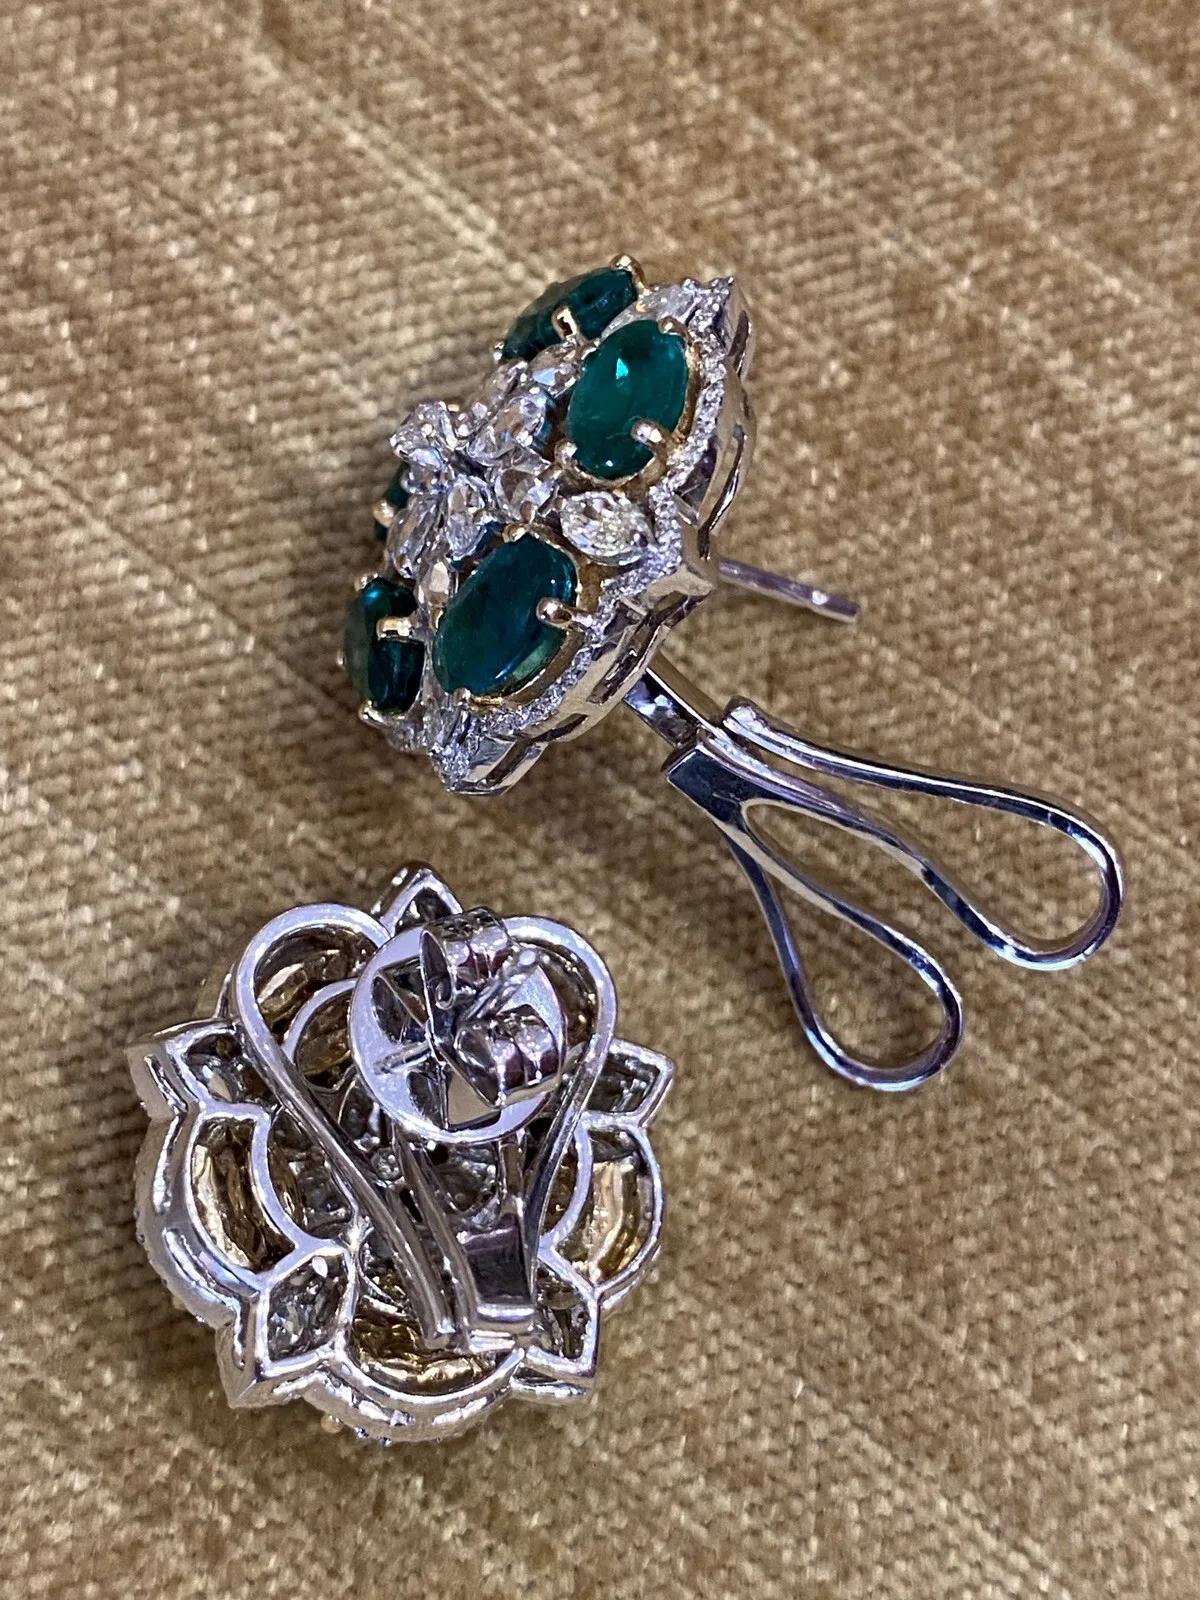 Large Emerald and Diamond Star Design Earrings in 18k White Gold In Excellent Condition For Sale In La Jolla, CA